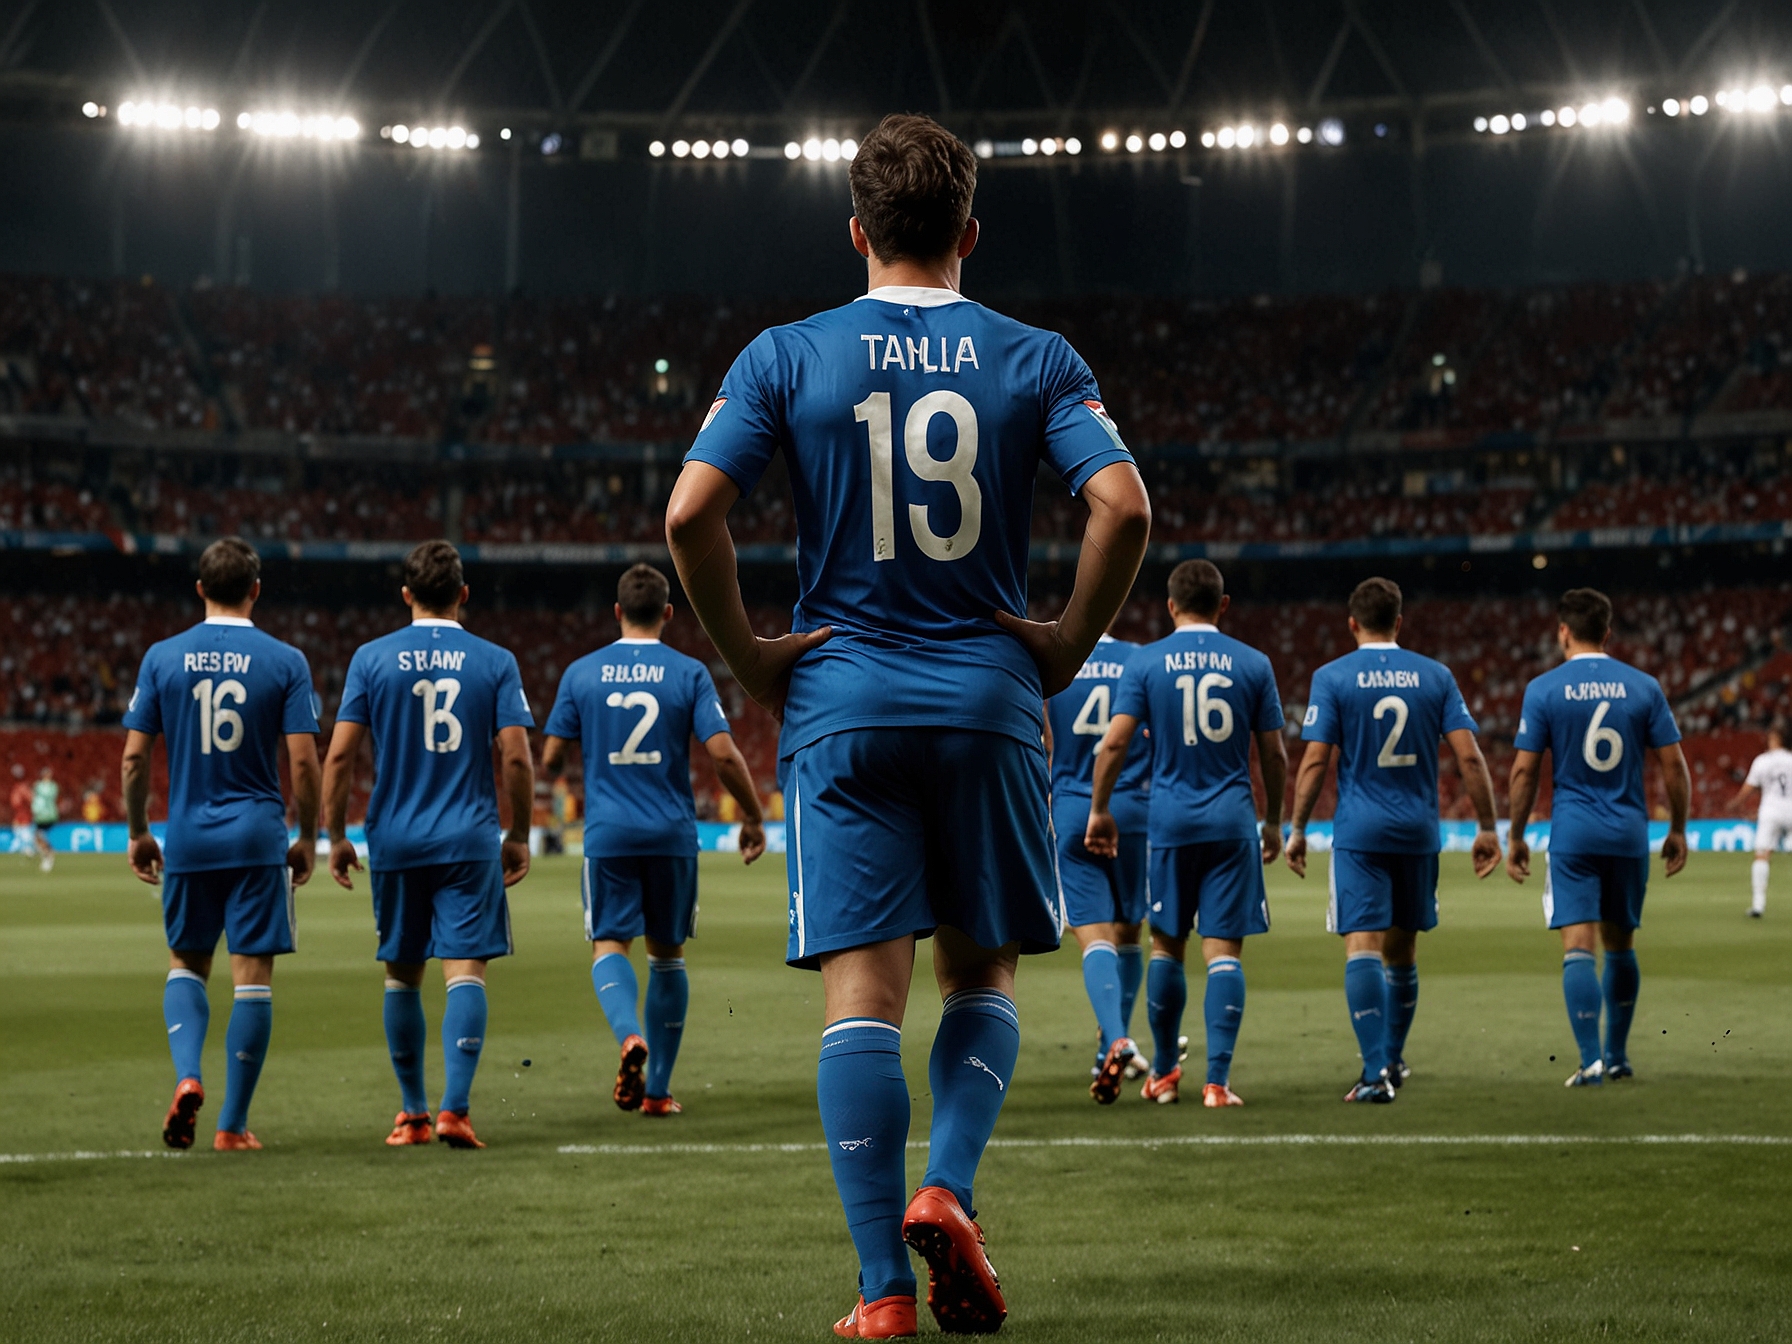 Dejected Italian players walk off the pitch after a tough 1-0 loss to Spain. Despite their valiant efforts, they were unable to penetrate Spain's robust defense, putting them in a precarious position in Group B.